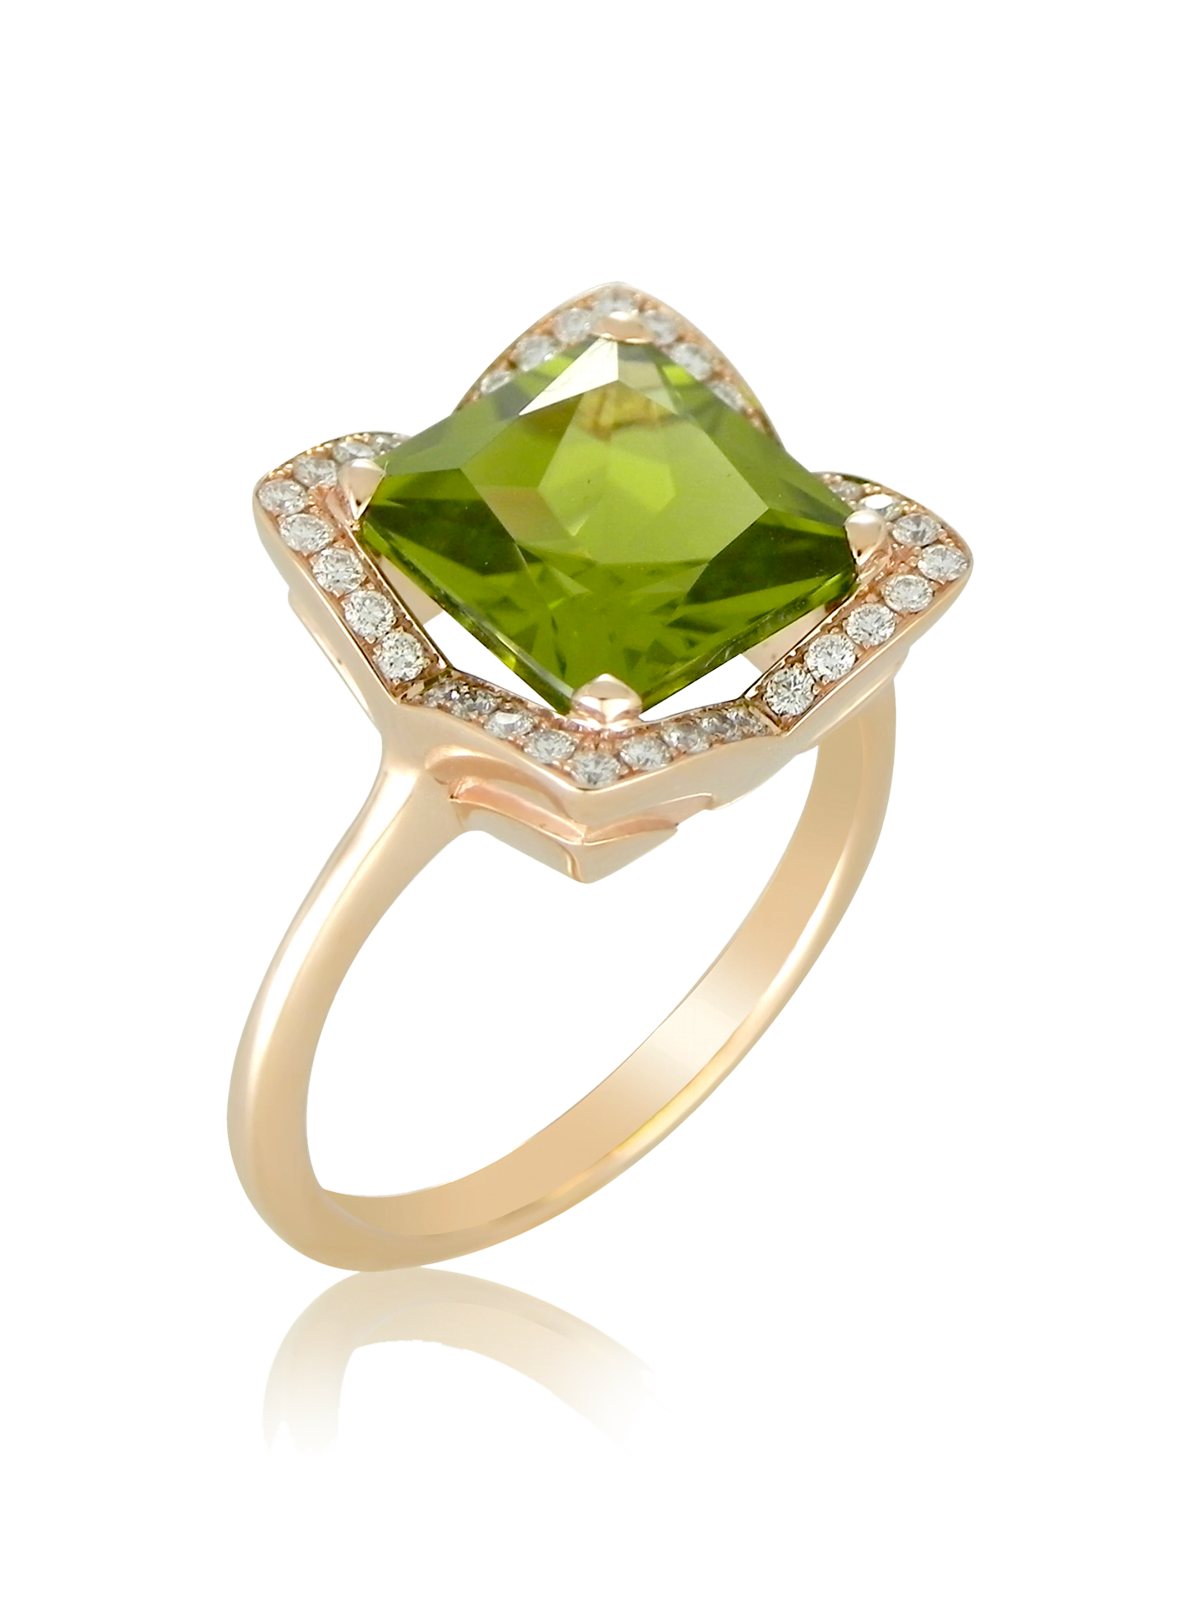 Amazing Peridot Surrounded by Pavé Diamonds Ring Best Price at Sophy Geneva Jewellery